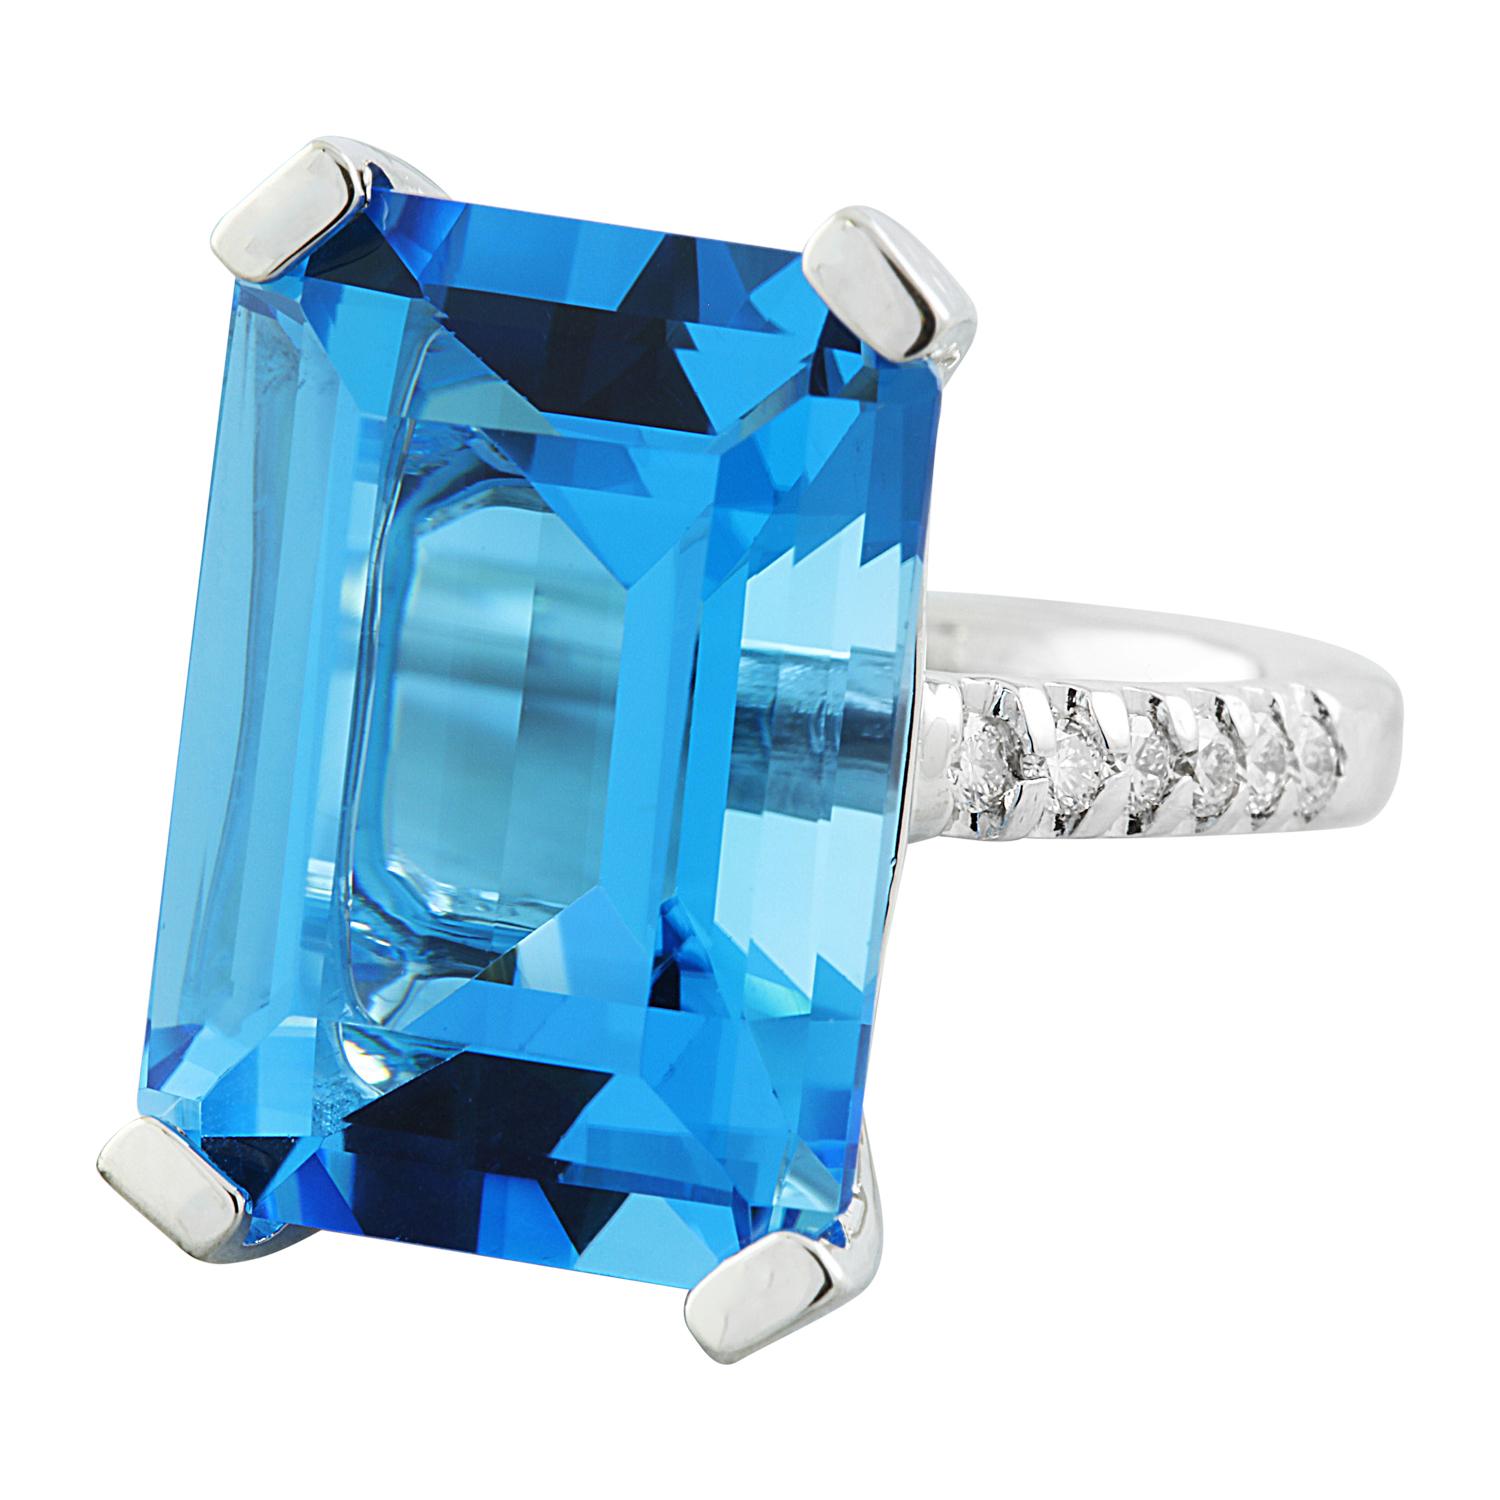 Introducing a luxurious statement piece that exudes elegance and sophistication - the 12.30 Carat Natural Topaz 14 Karat Solid White Gold Diamond Ring. This ring is a symbol of opulence and refinement.

Crafted to perfection, this ring, sized for a